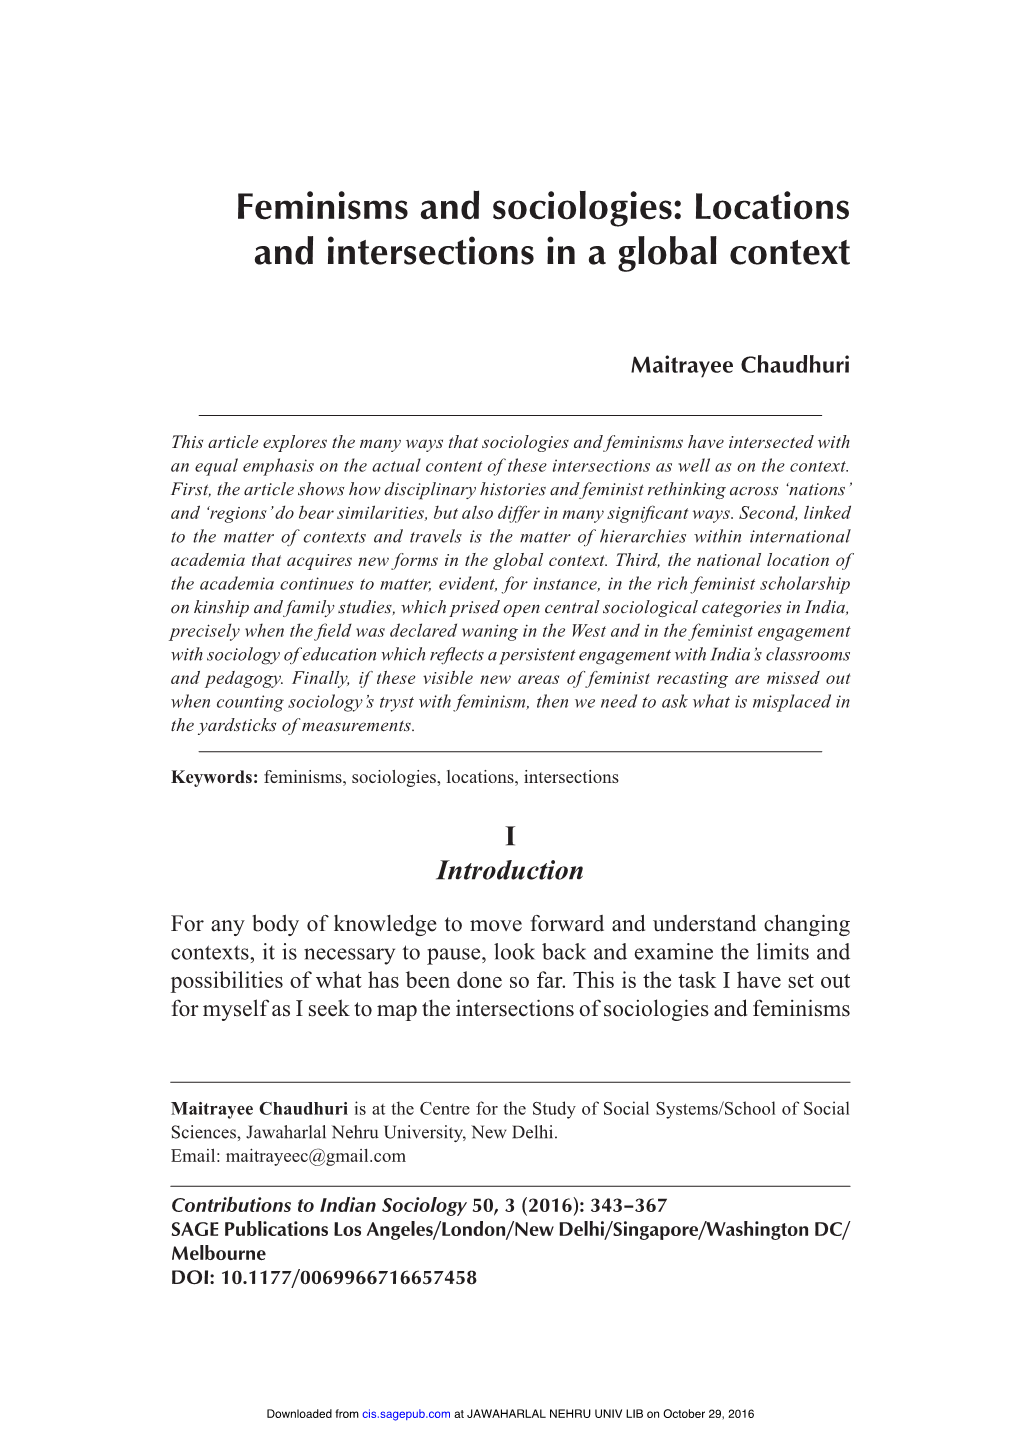 Feminisms and Sociologies: Locations and Intersections in a Global Context